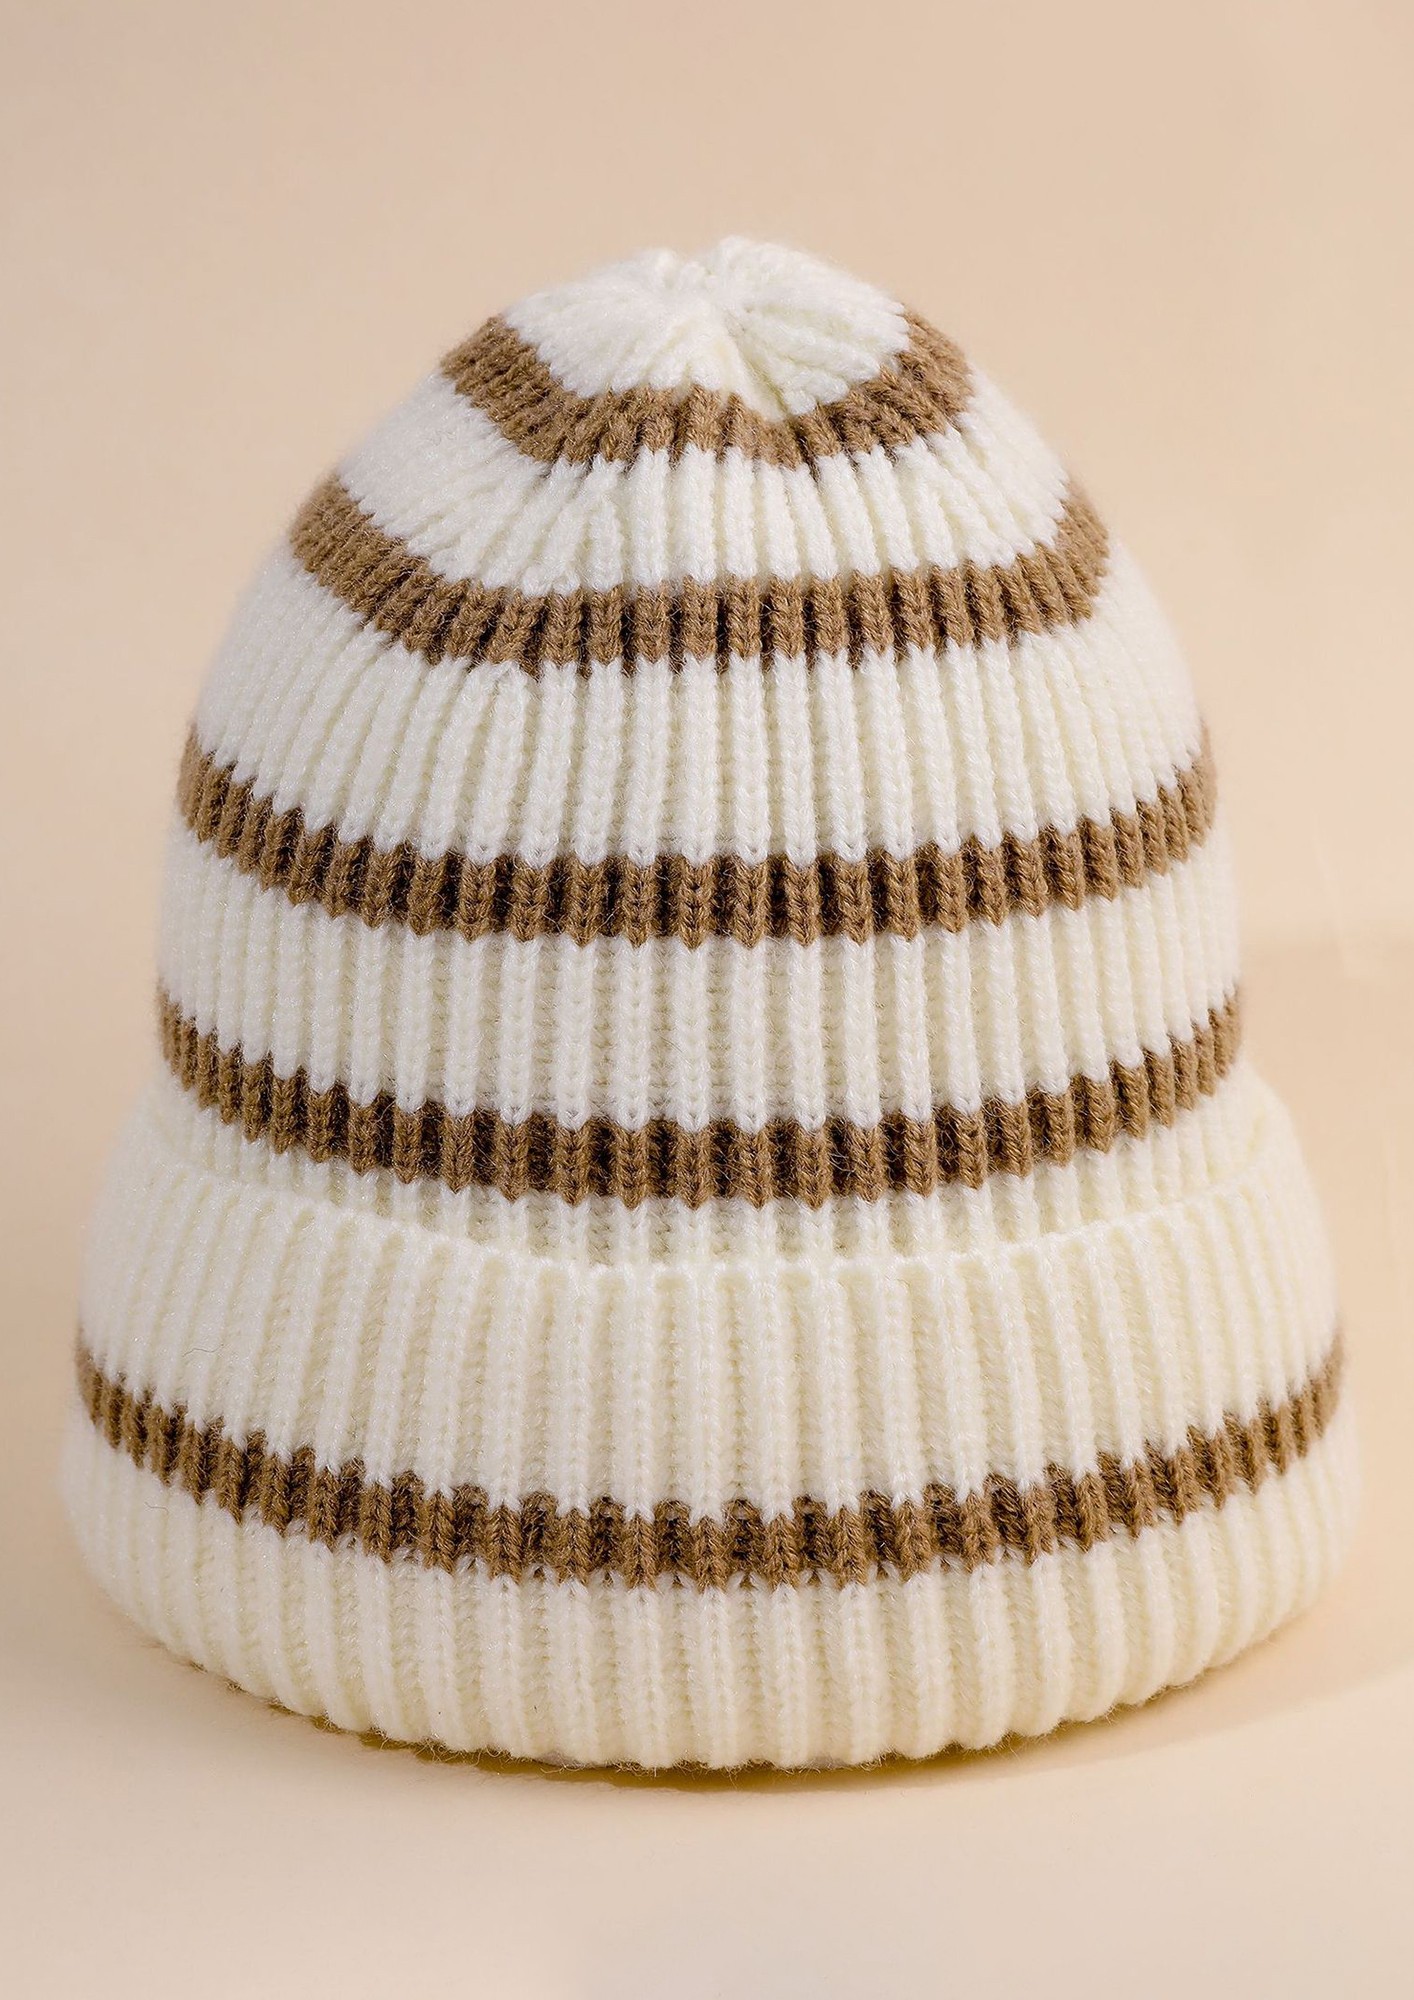 STRIPED ACRYLIC KNITTED BEIGE-BROWN HAT